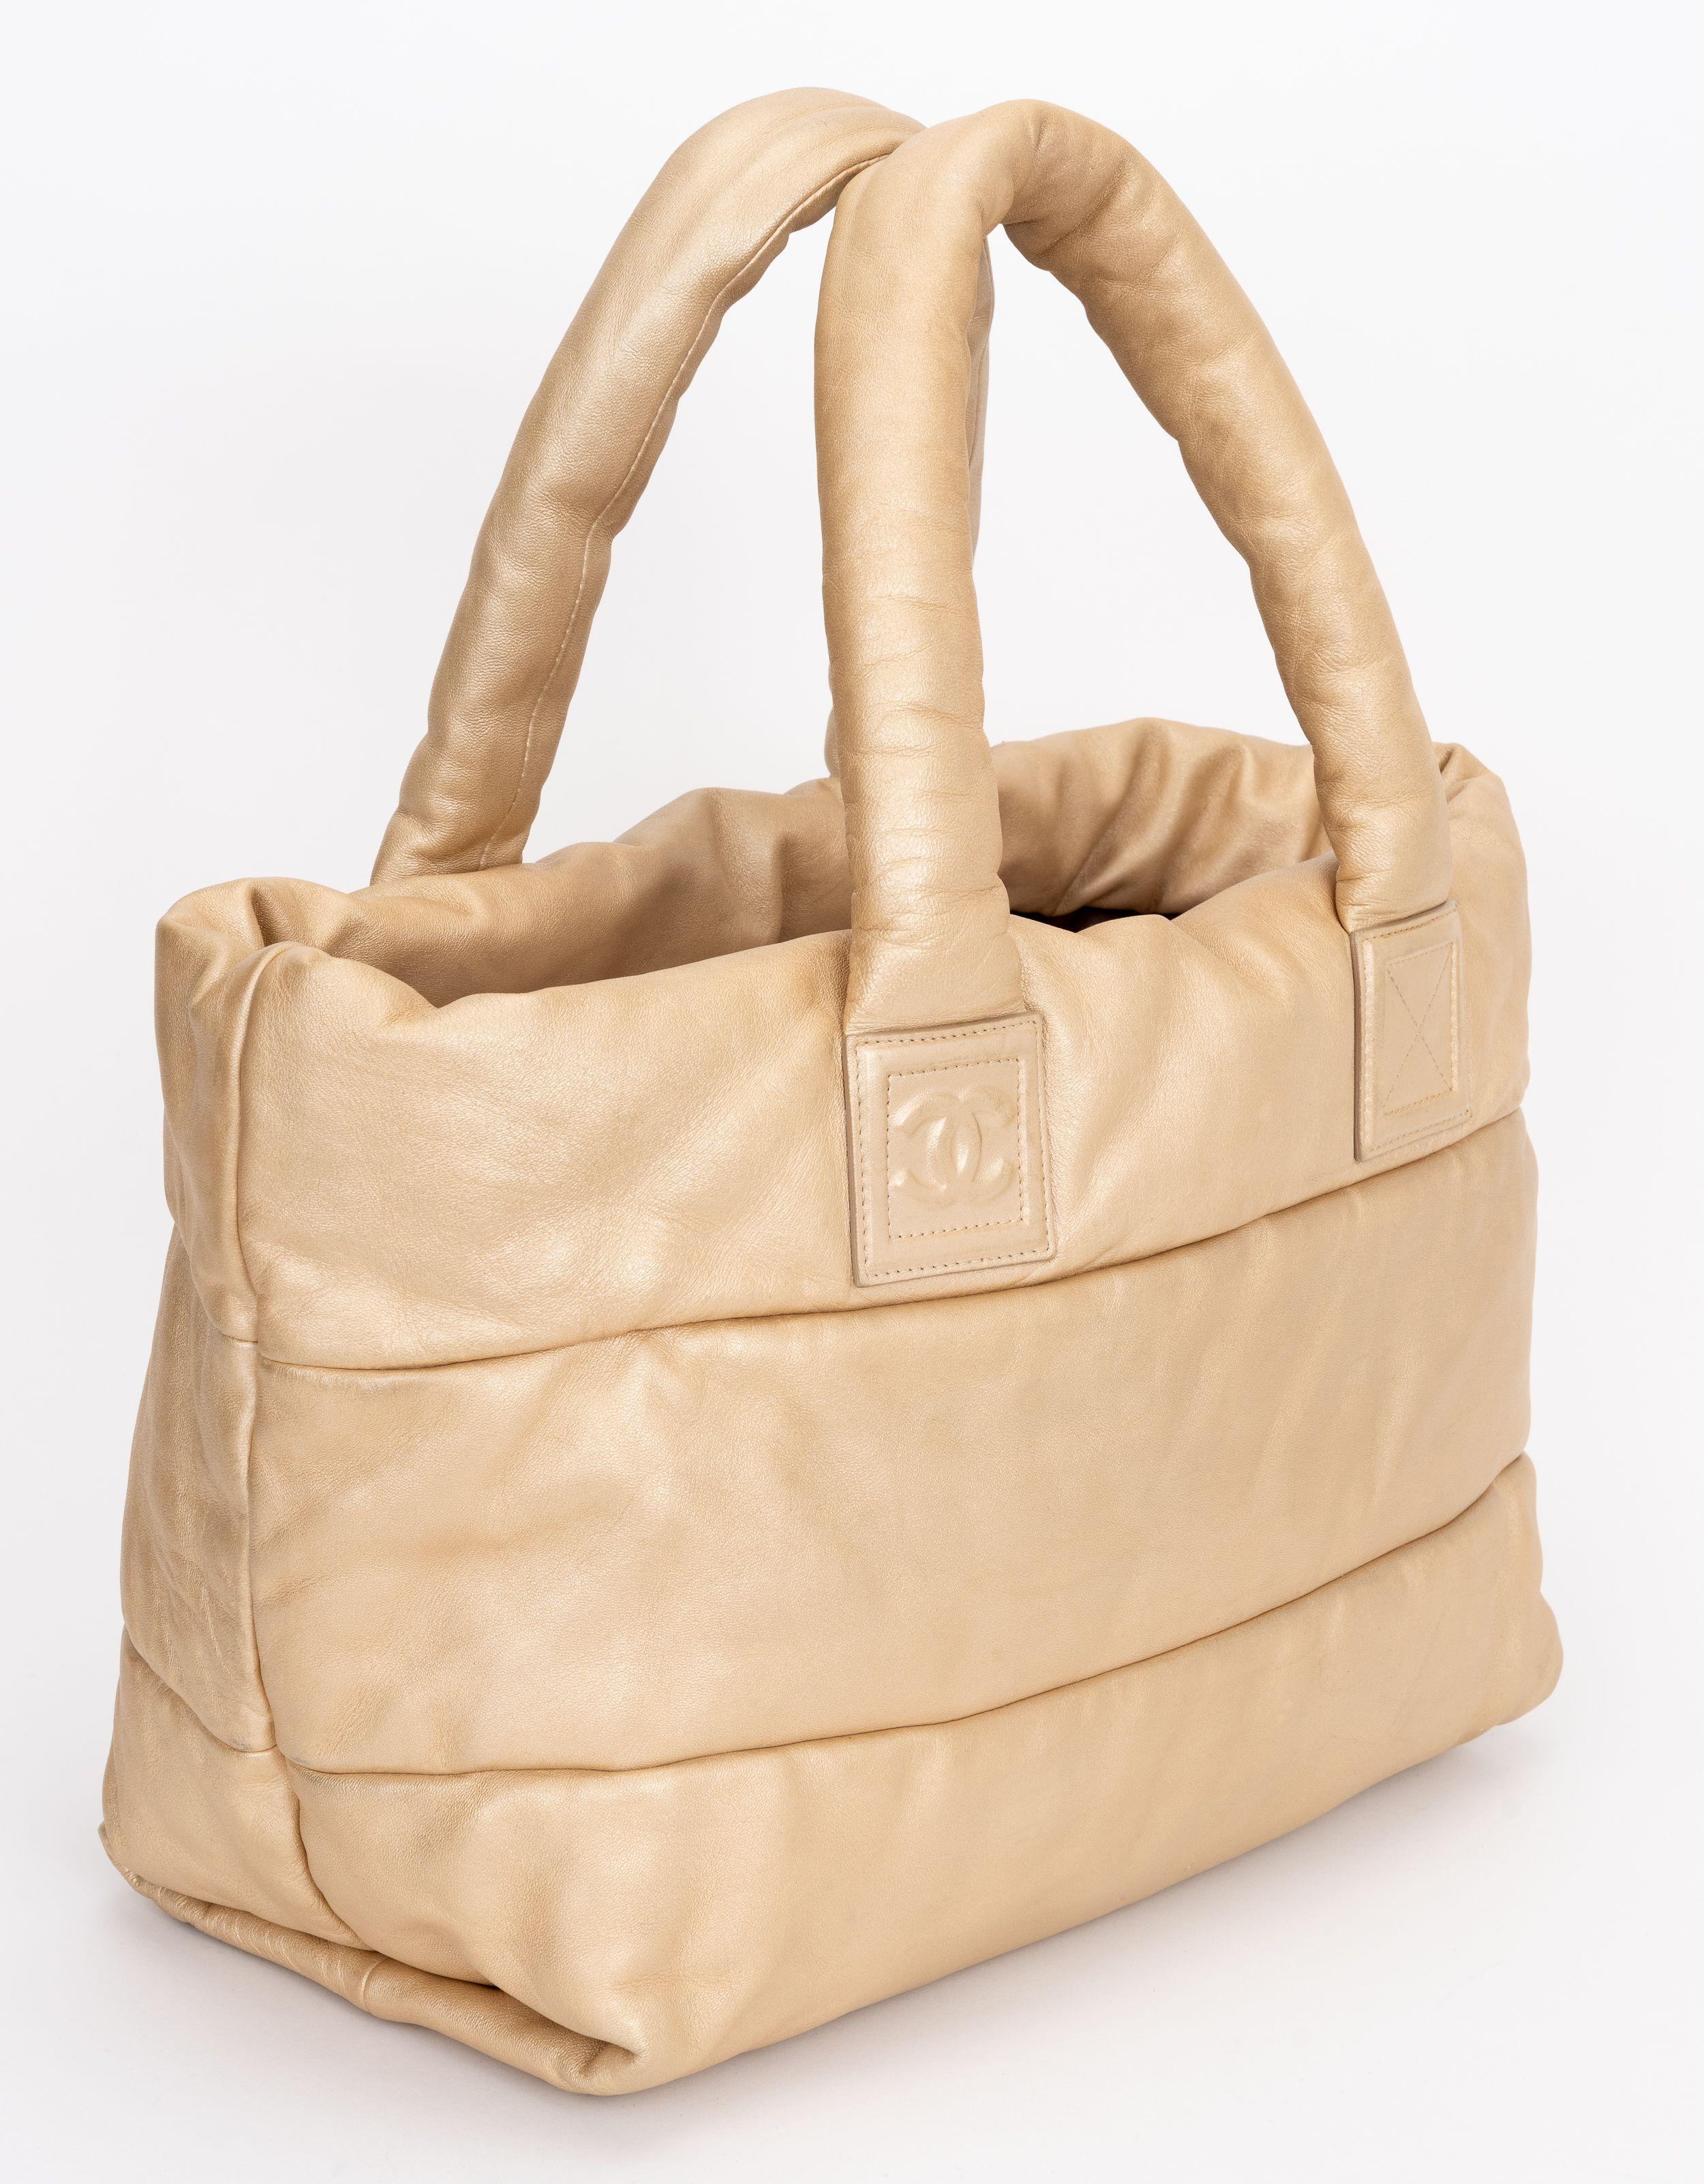 The Coco Cocoon Tote made from soft Lambskin and Brushed Gold Hardware is the essential everyday tote. It features one compartment with hook closure and one interior zipper pocket
Shoulder drop 7